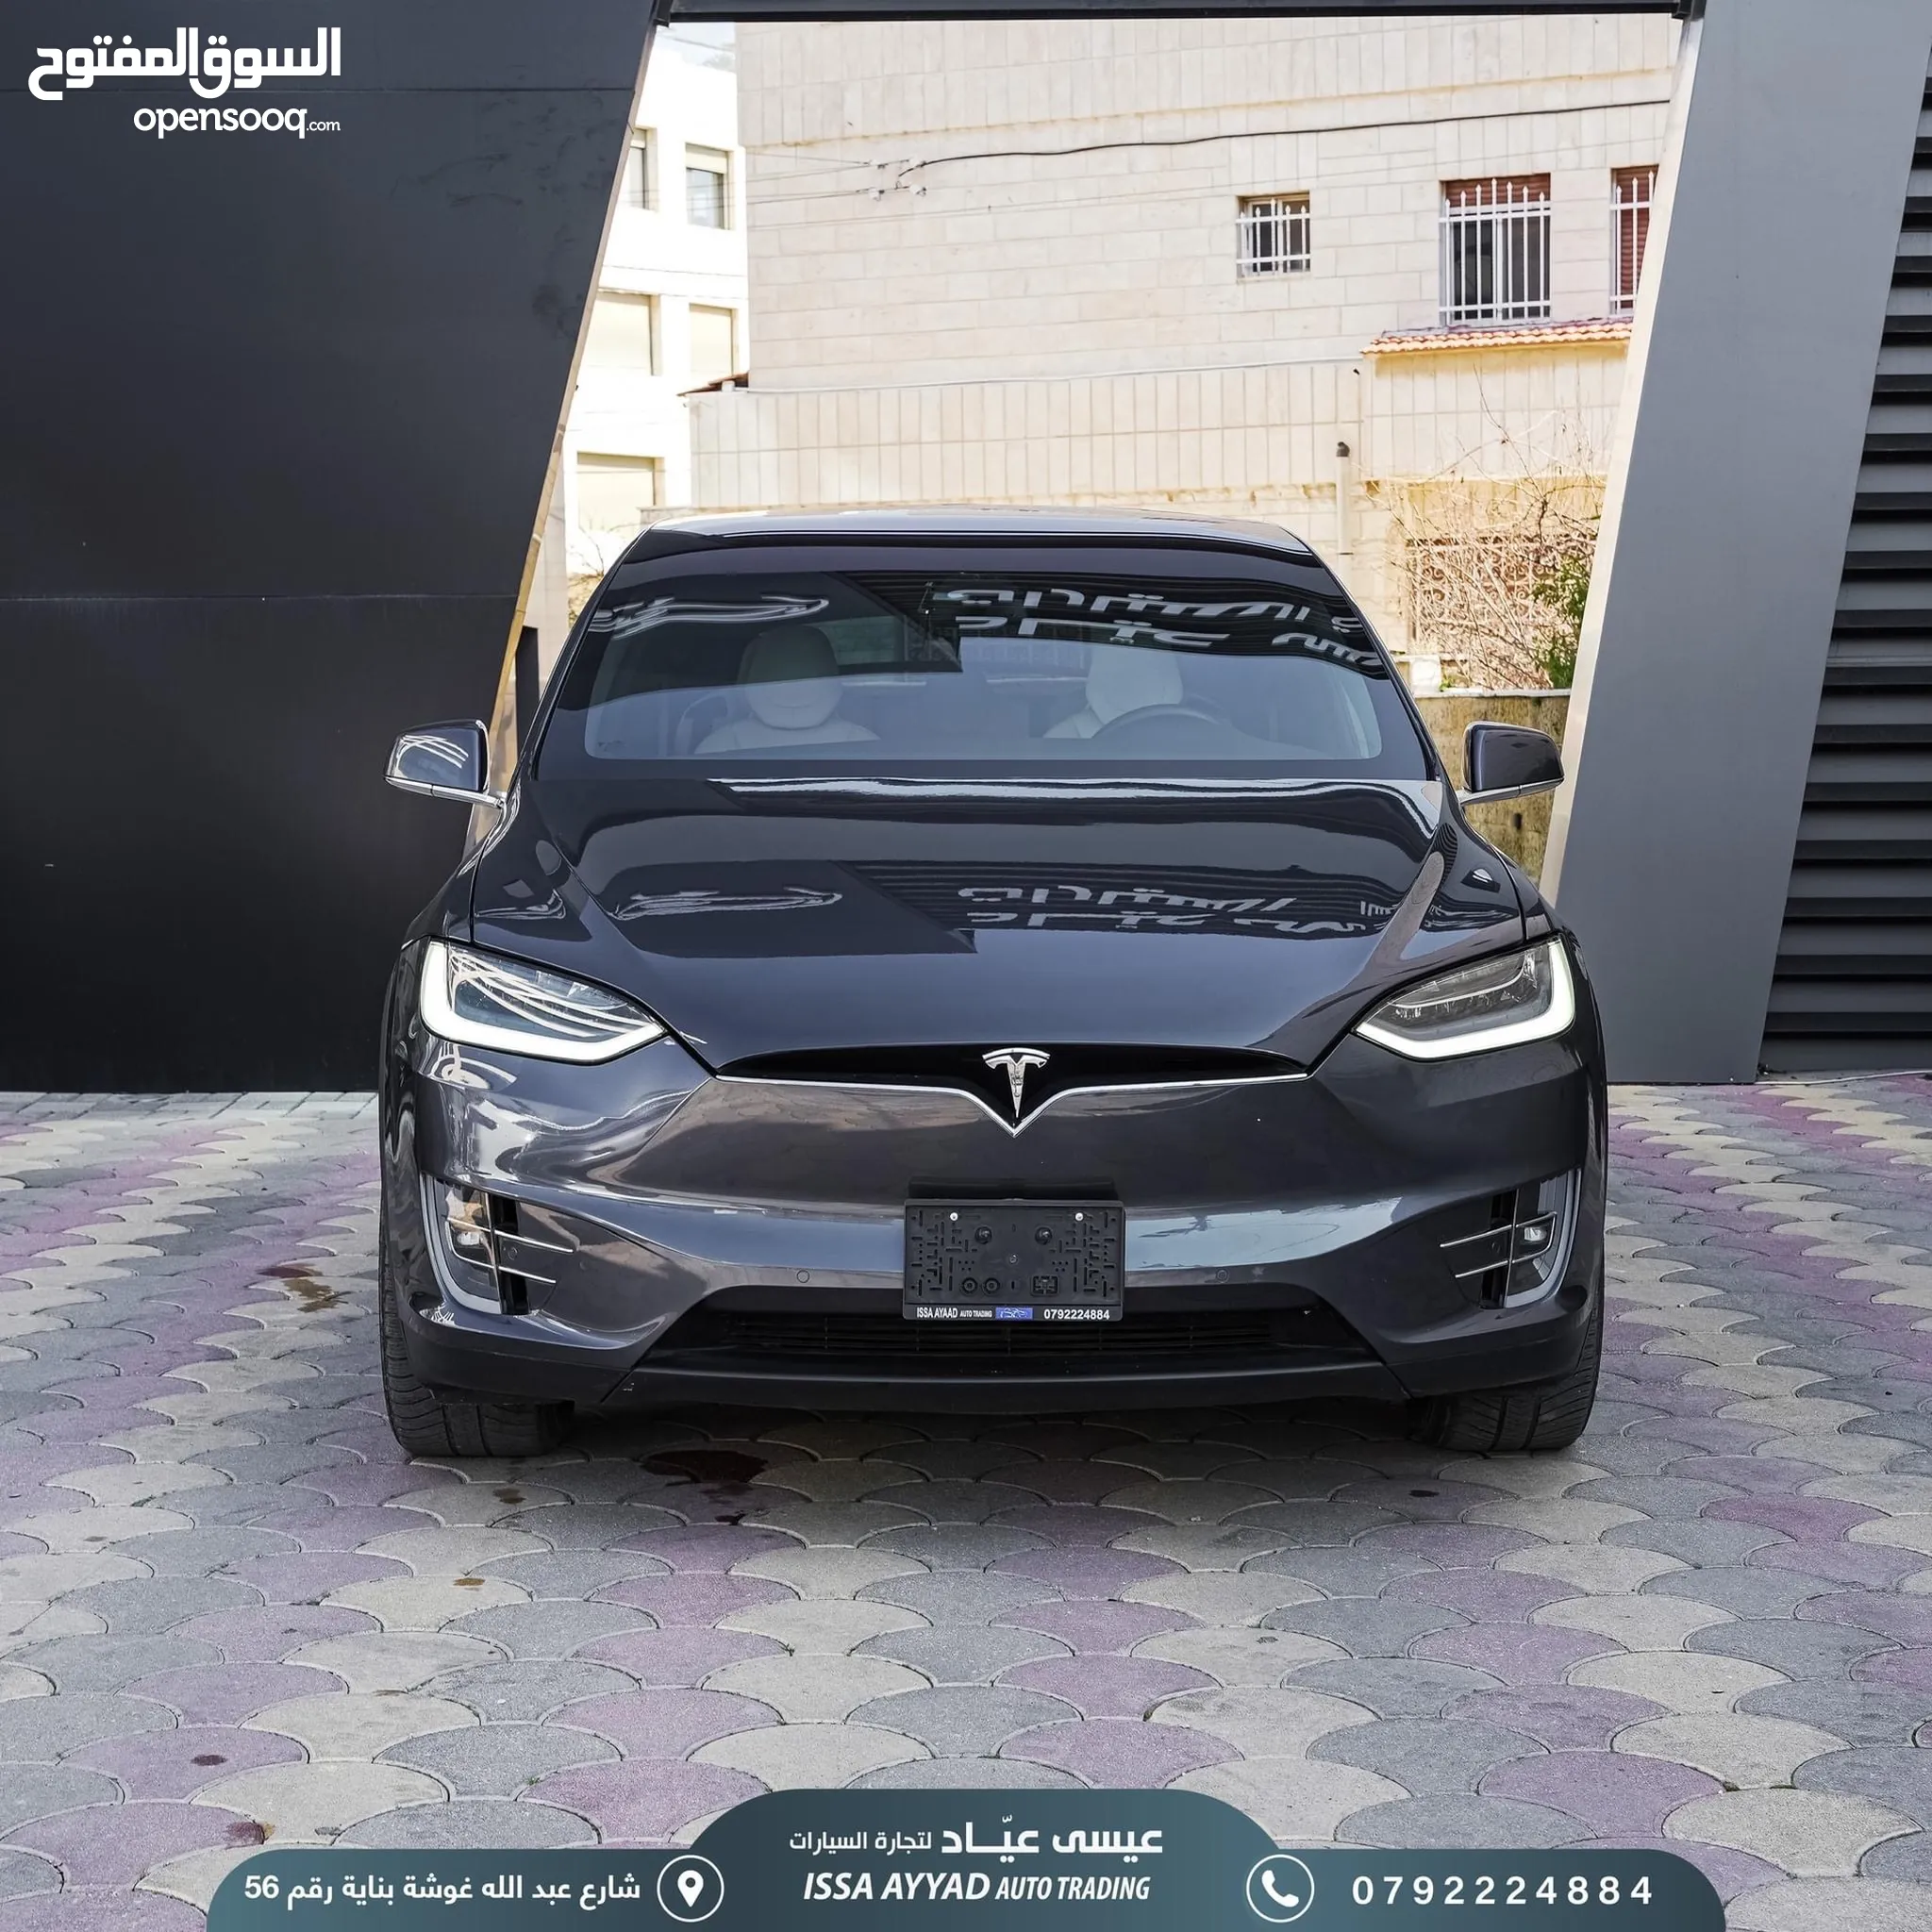 Tesla X Cars for Sale in Jordan : Best Prices : All X Models : New & Used |  OpenSooq